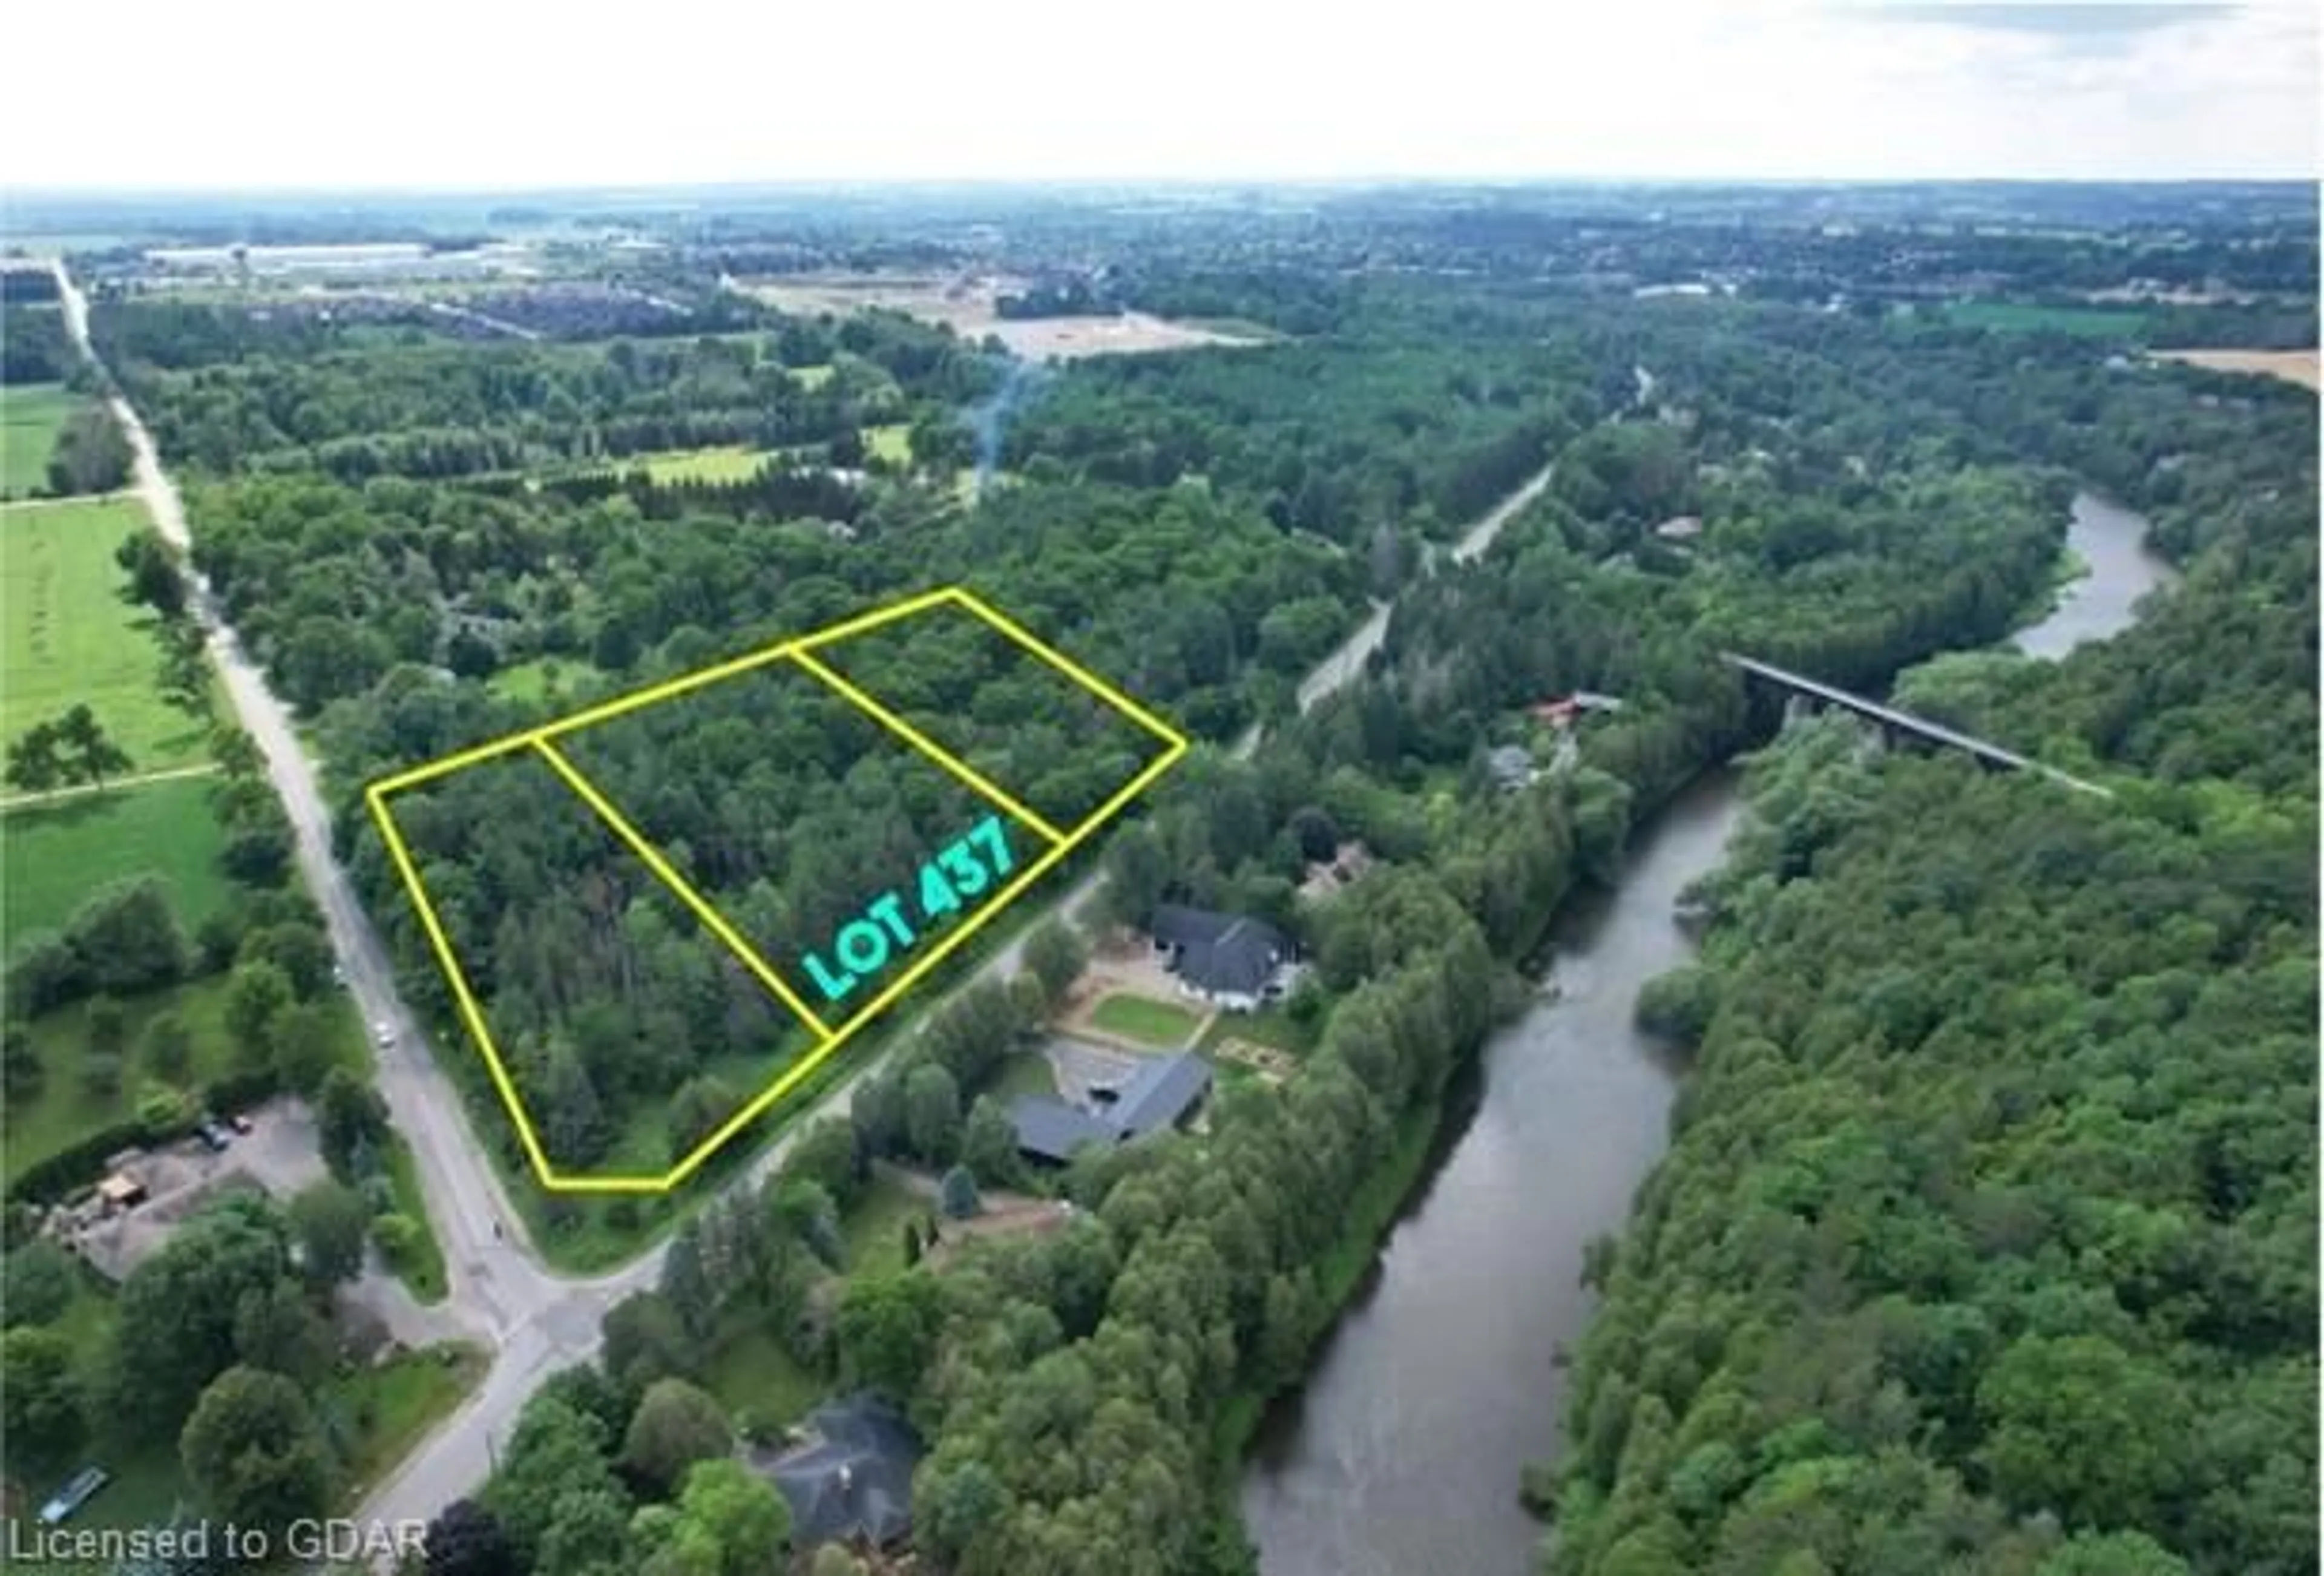 Lakeview for LOT 437 South River Rd, Elora Ontario N0B 1S0